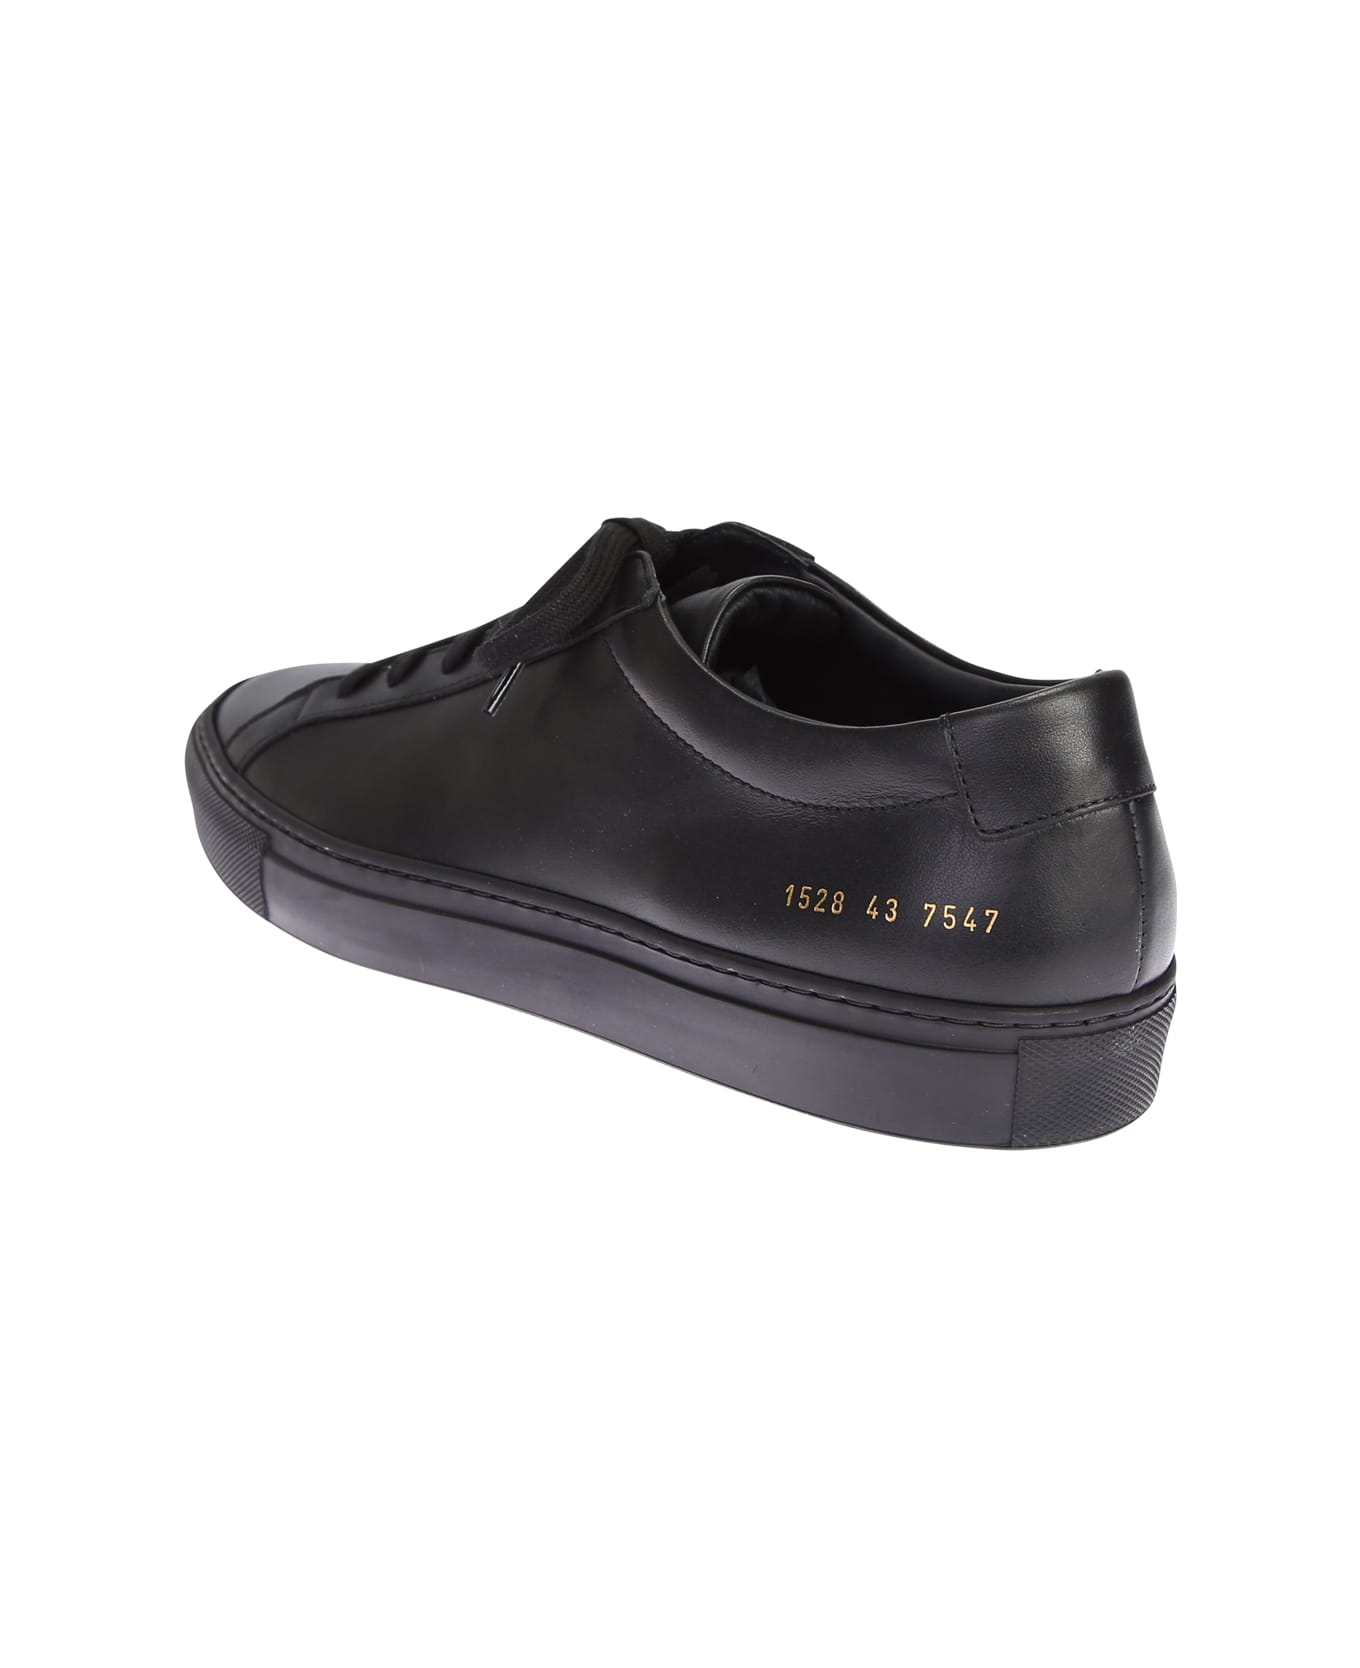 Common Projects Black Sneakers - Black スニーカー